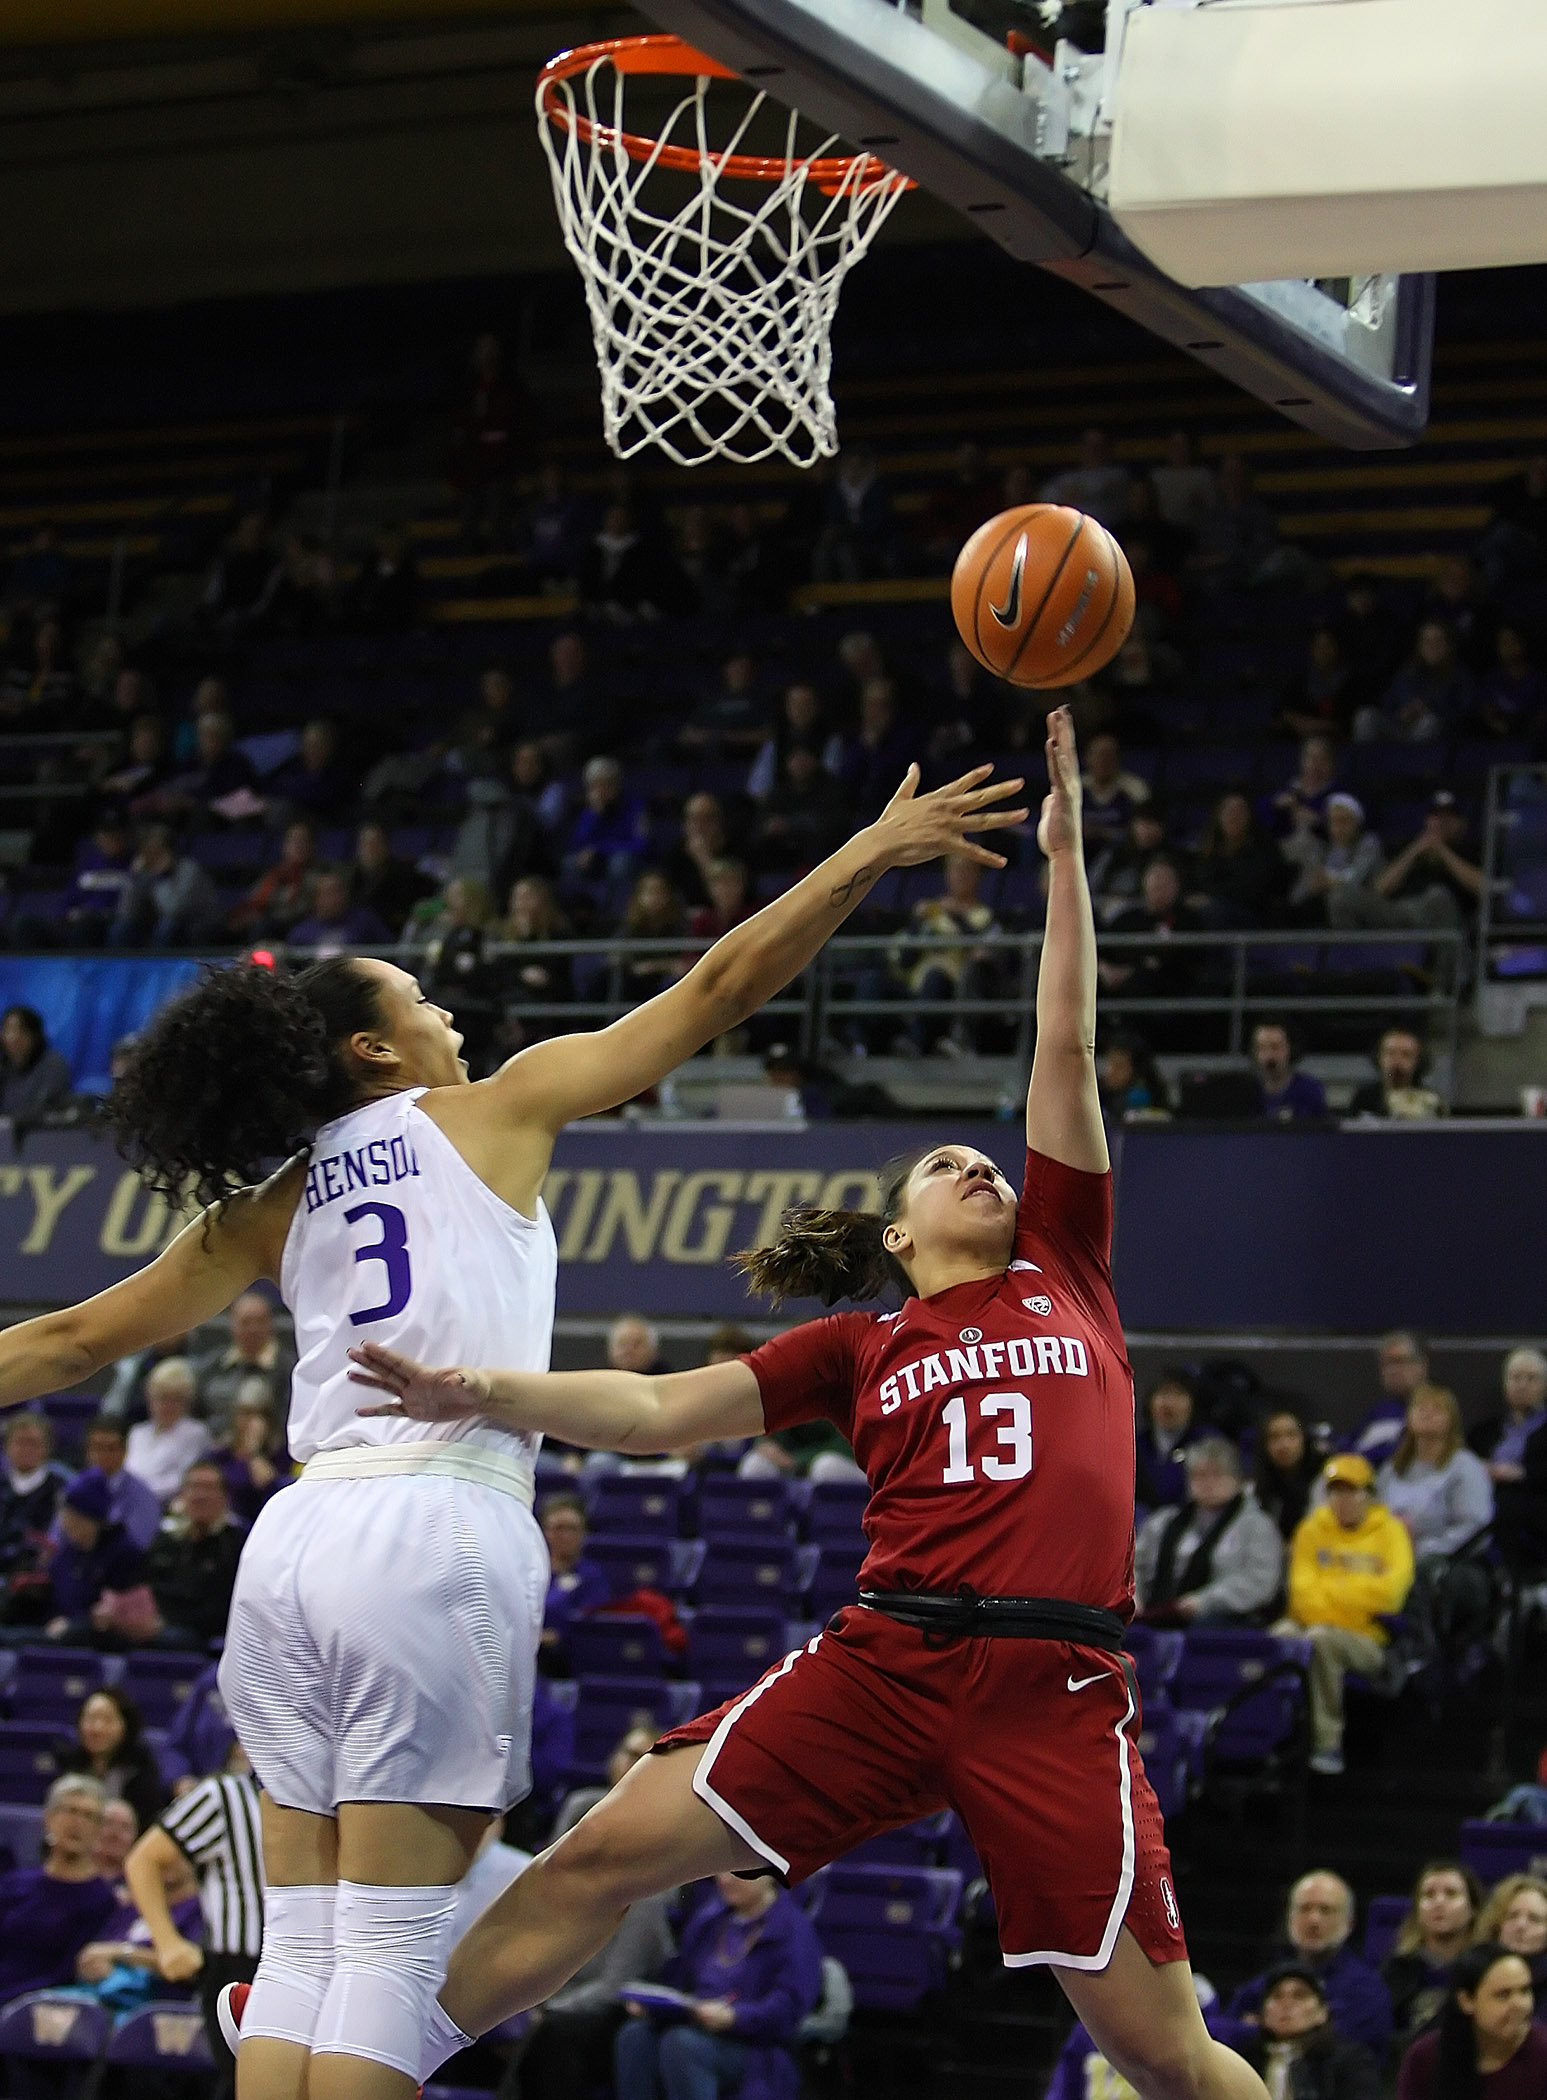 Marta Sniezek of Stanford puts up a shot against the defensive pressure from Washington’s Mia-Loni Henson.